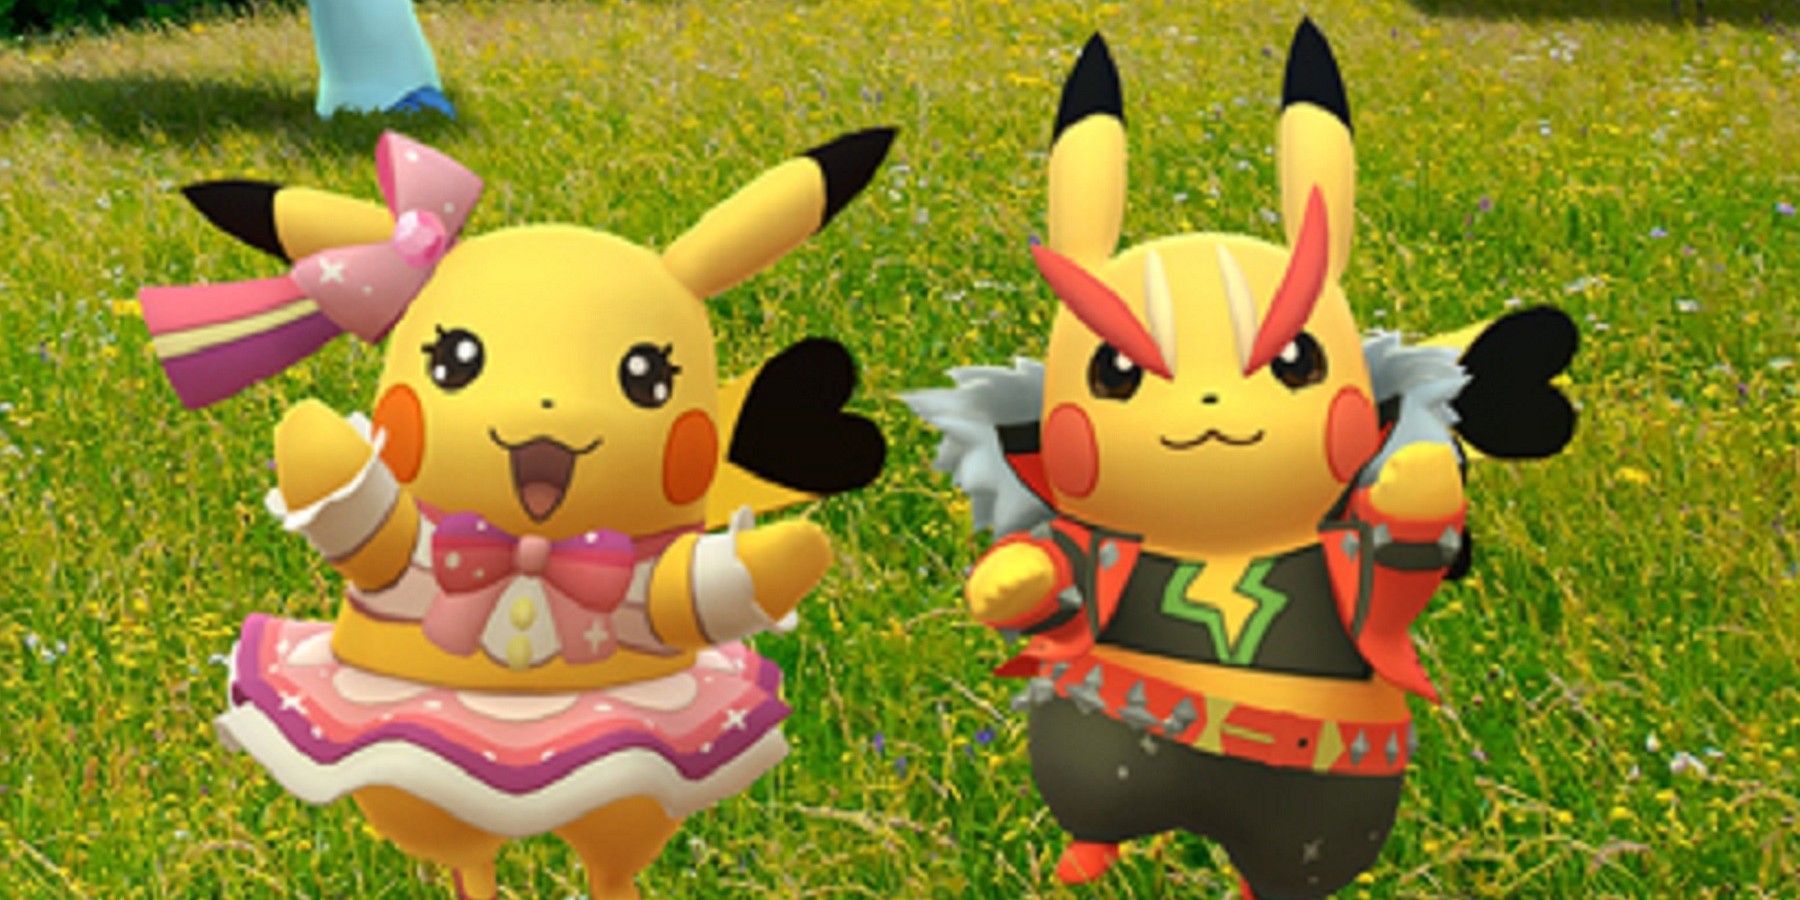 Two dressed up Pikachu. 